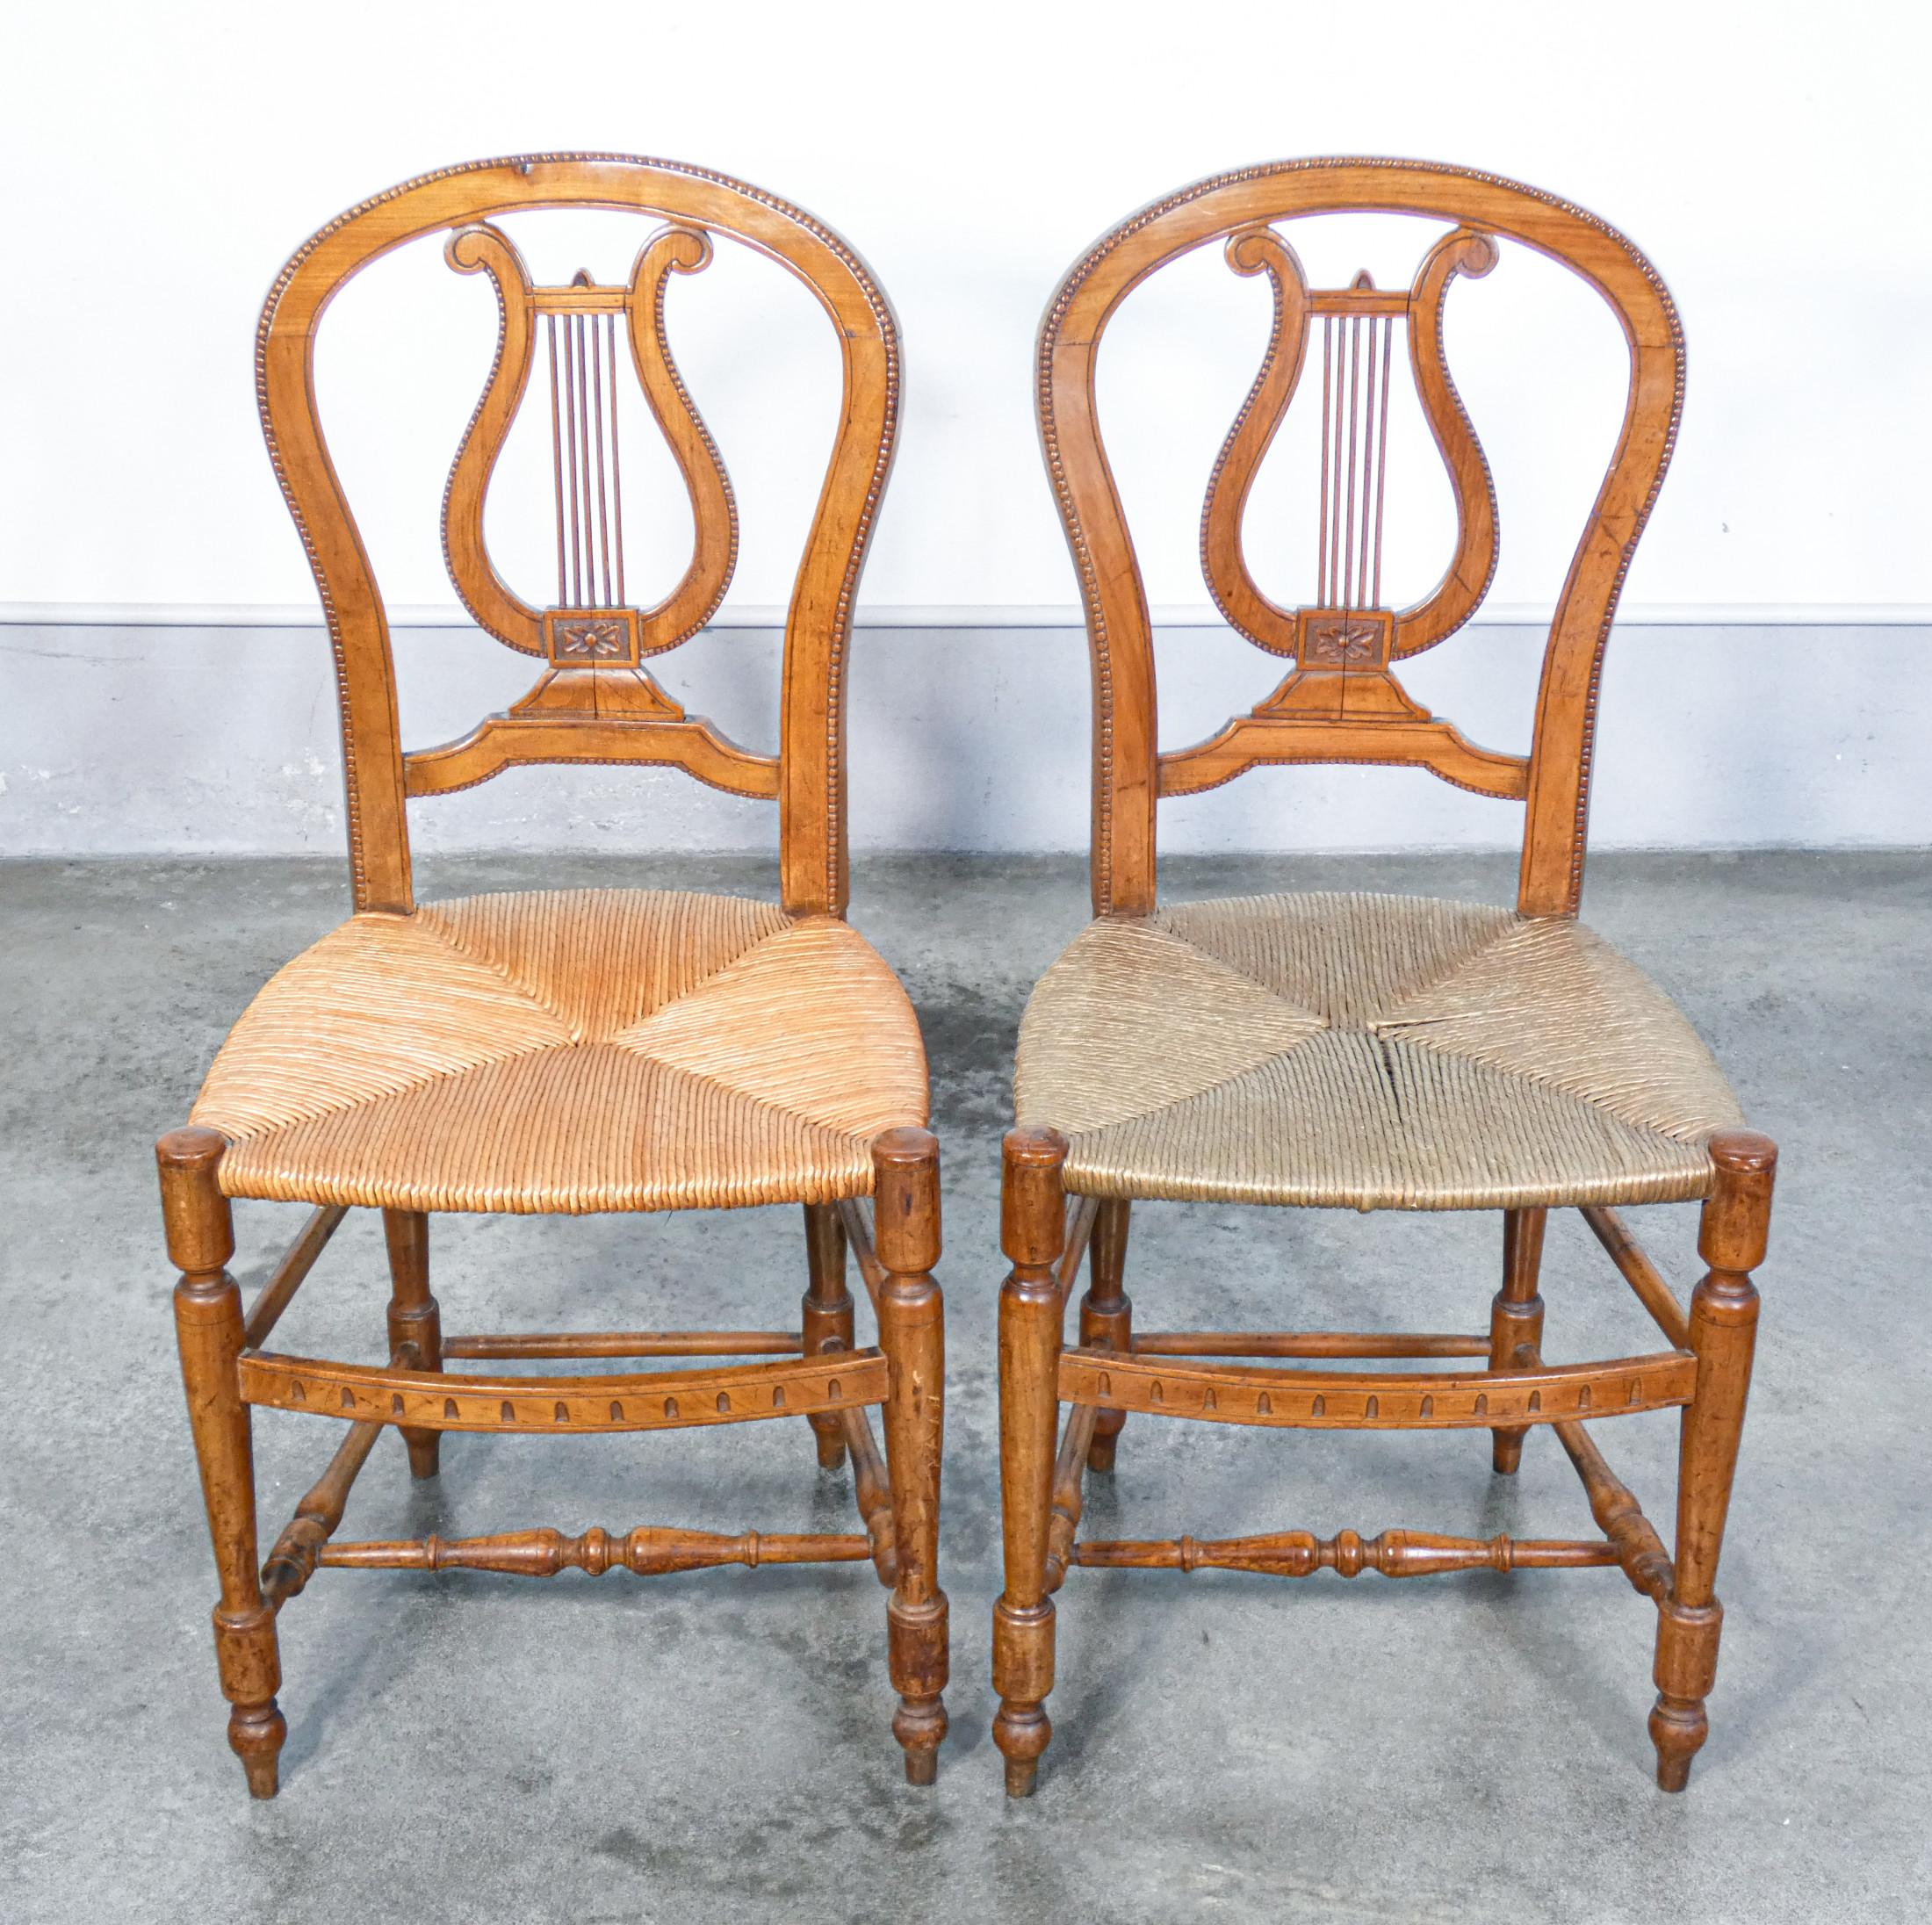 Italian Pair of Cherry Wood Chairs with Lyre-Shaped Back and Straw Seat, Early 20th For Sale